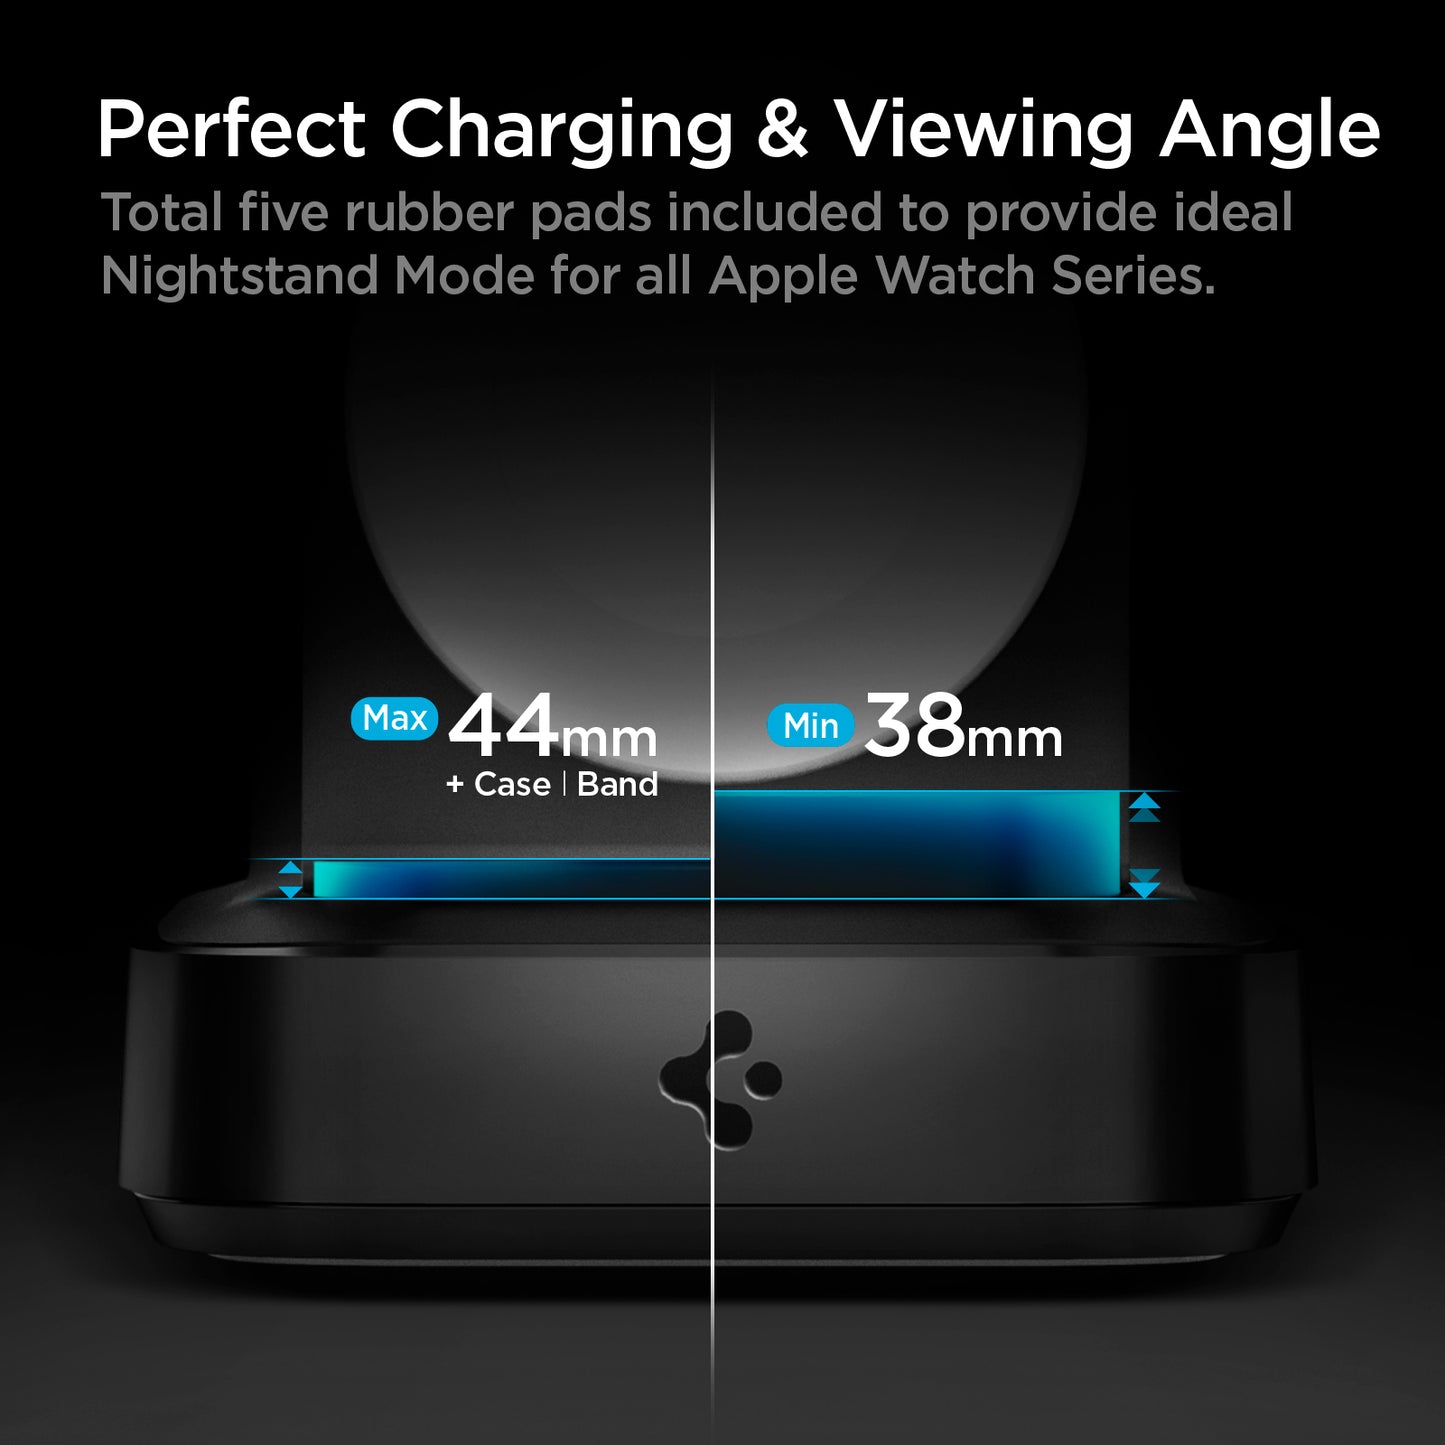 000CH25522 - Apple Watch ArcField™ 2.5W Wireless Charger PF2002 in Black showing the Perfect Charging & Viewing Angle. Total five rubber pads included to provide ideal Nightstand Mode for all Apple Watch Series with max (44mm) + case | Band and min (38mm)